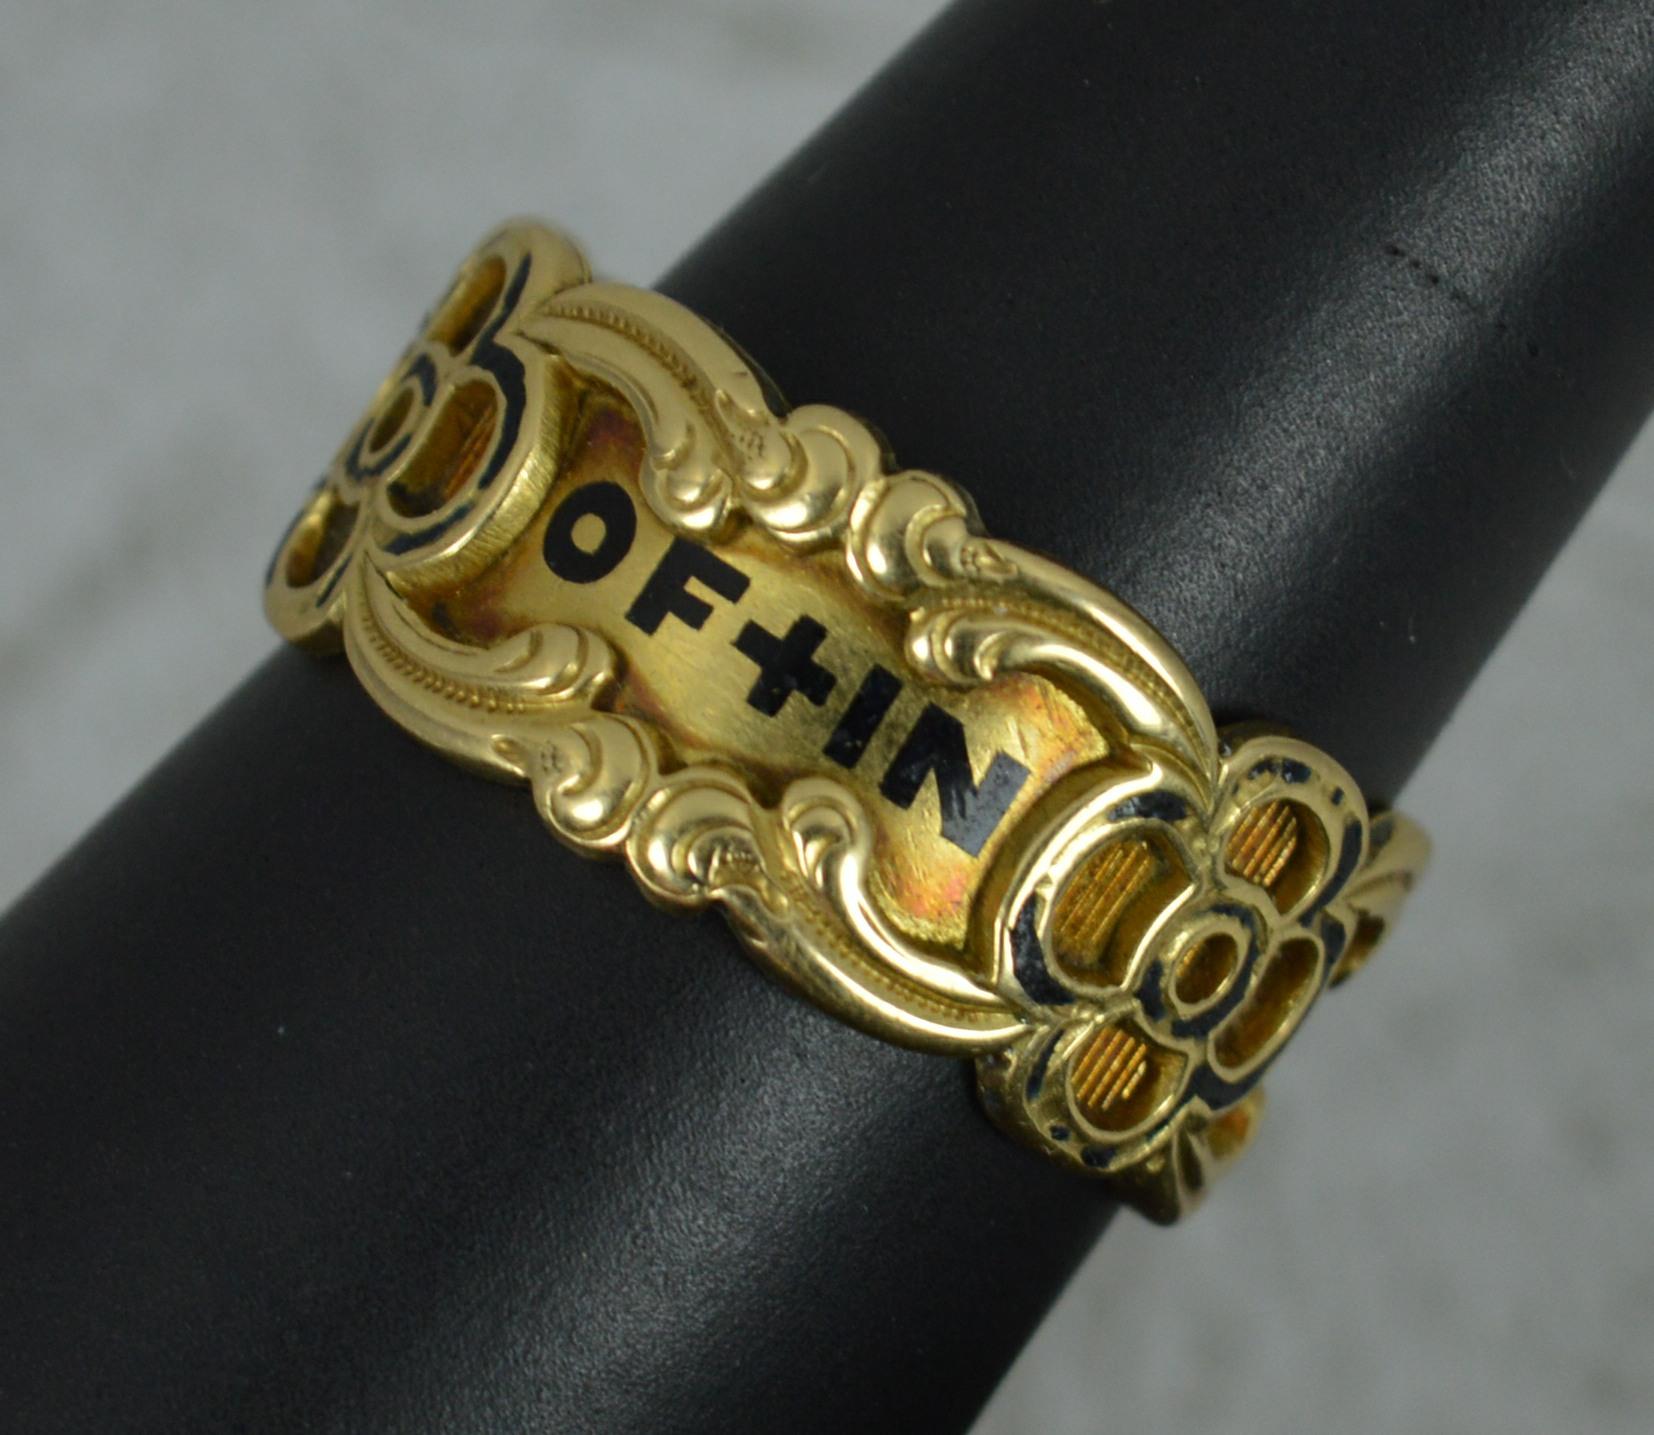 1842 Victorian 18 Carat Gold Enamel In Memory of Mourning Band Ring For Sale 6